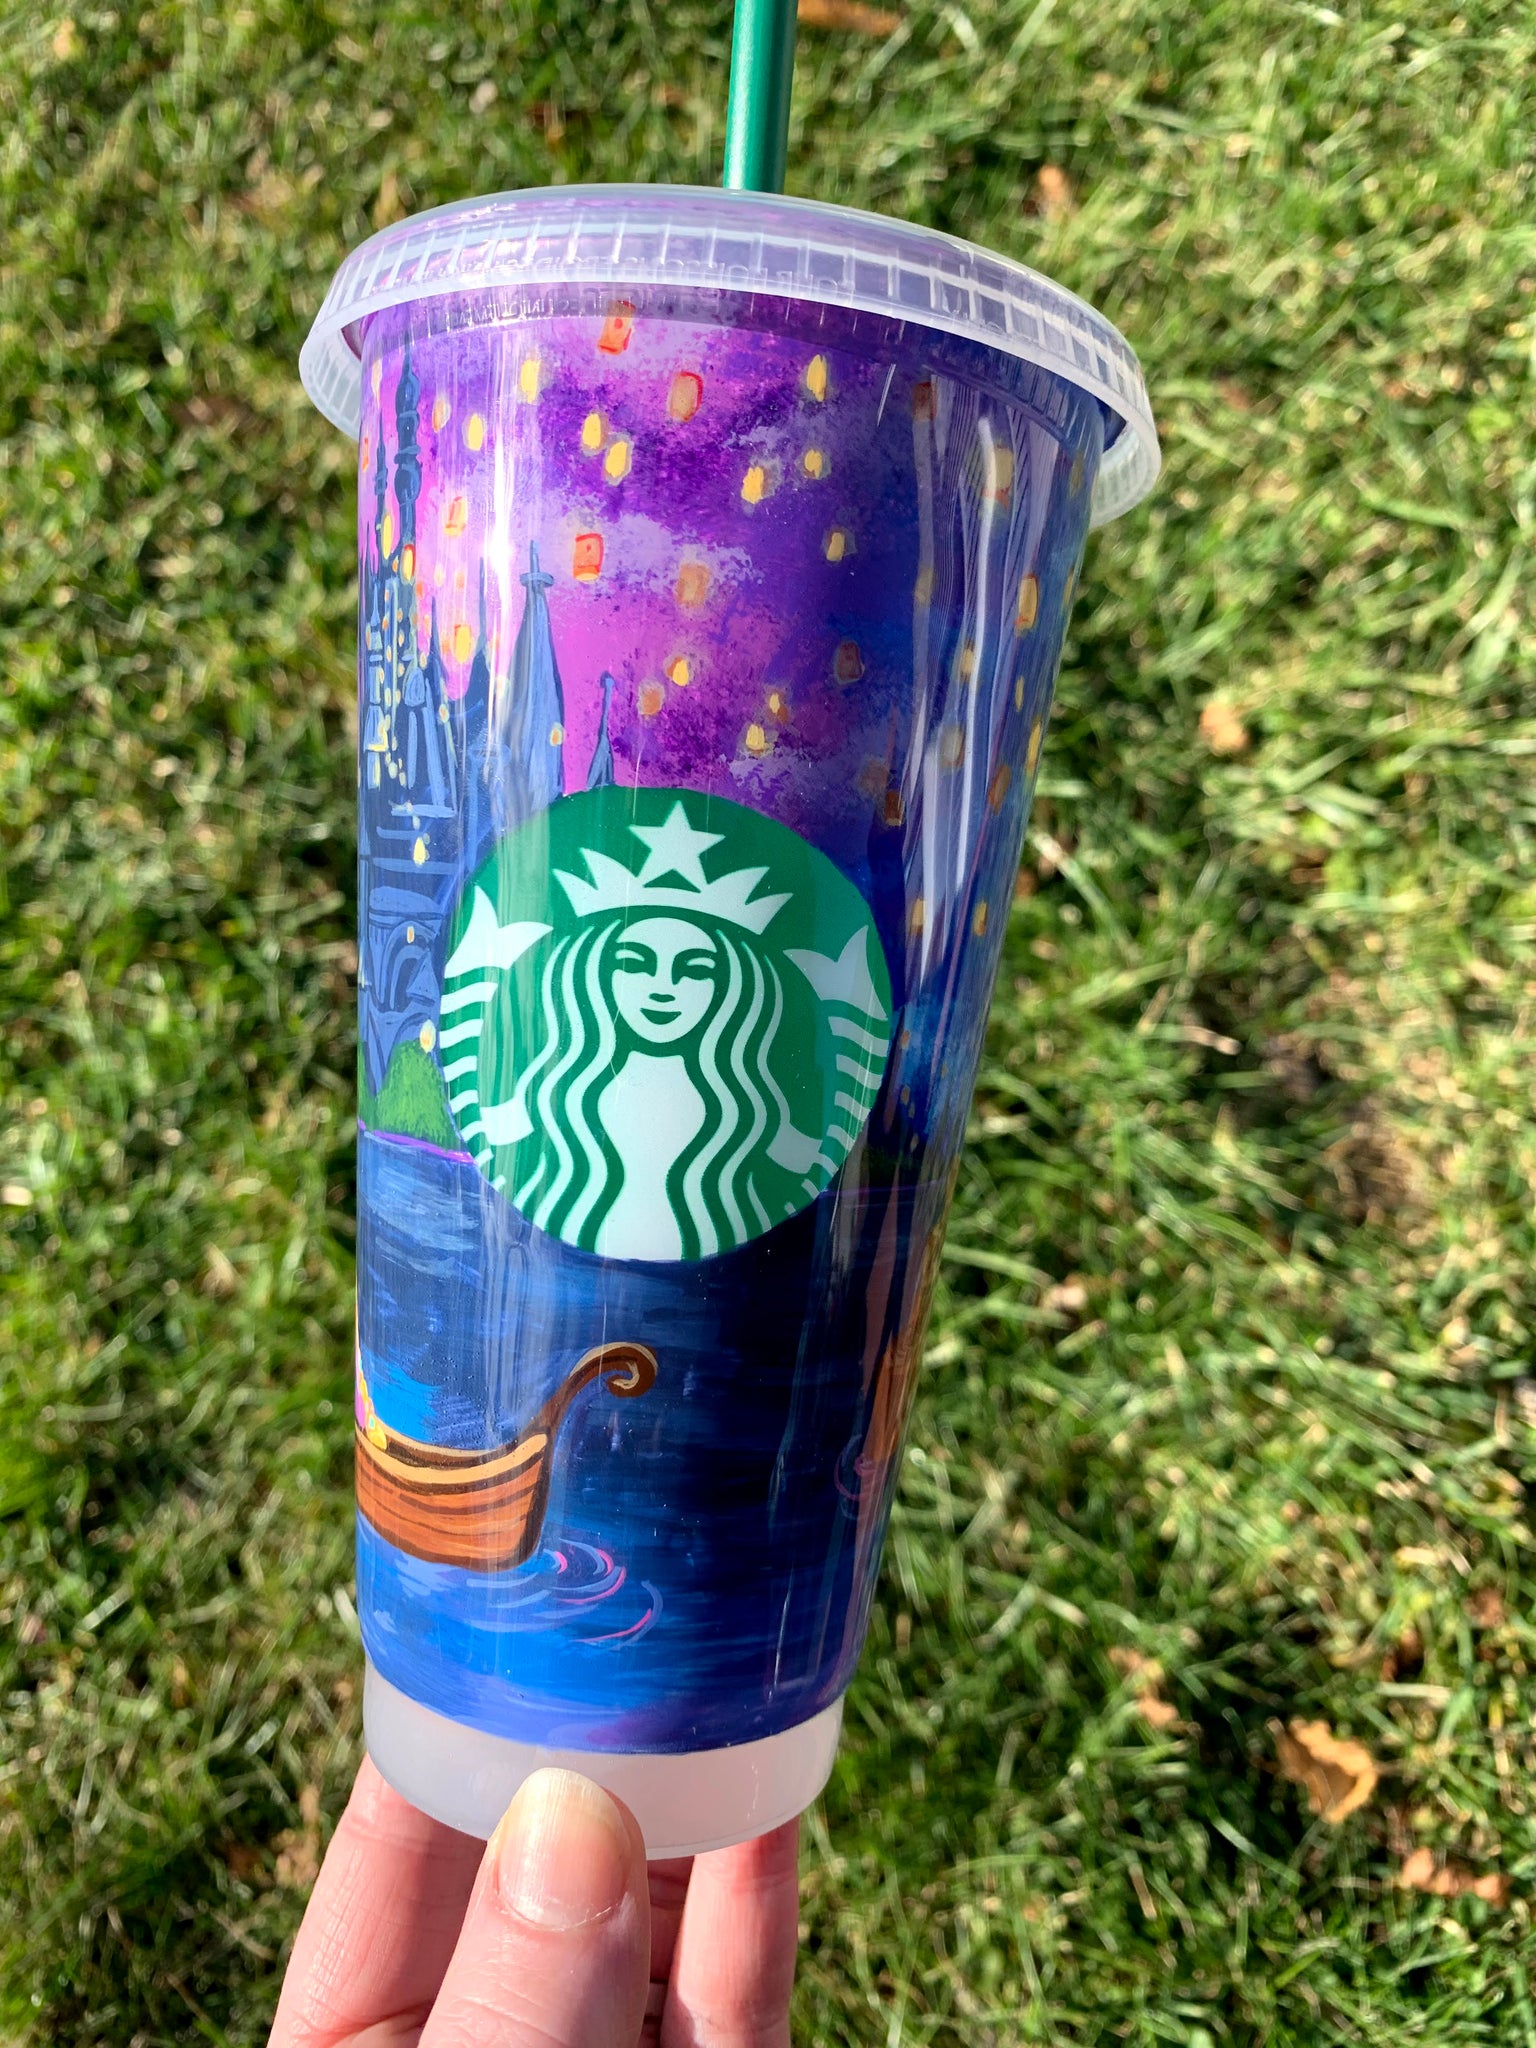 Wizard Stitch, Mischief Manager, Inspired Venti Starbucks Reusable Cup